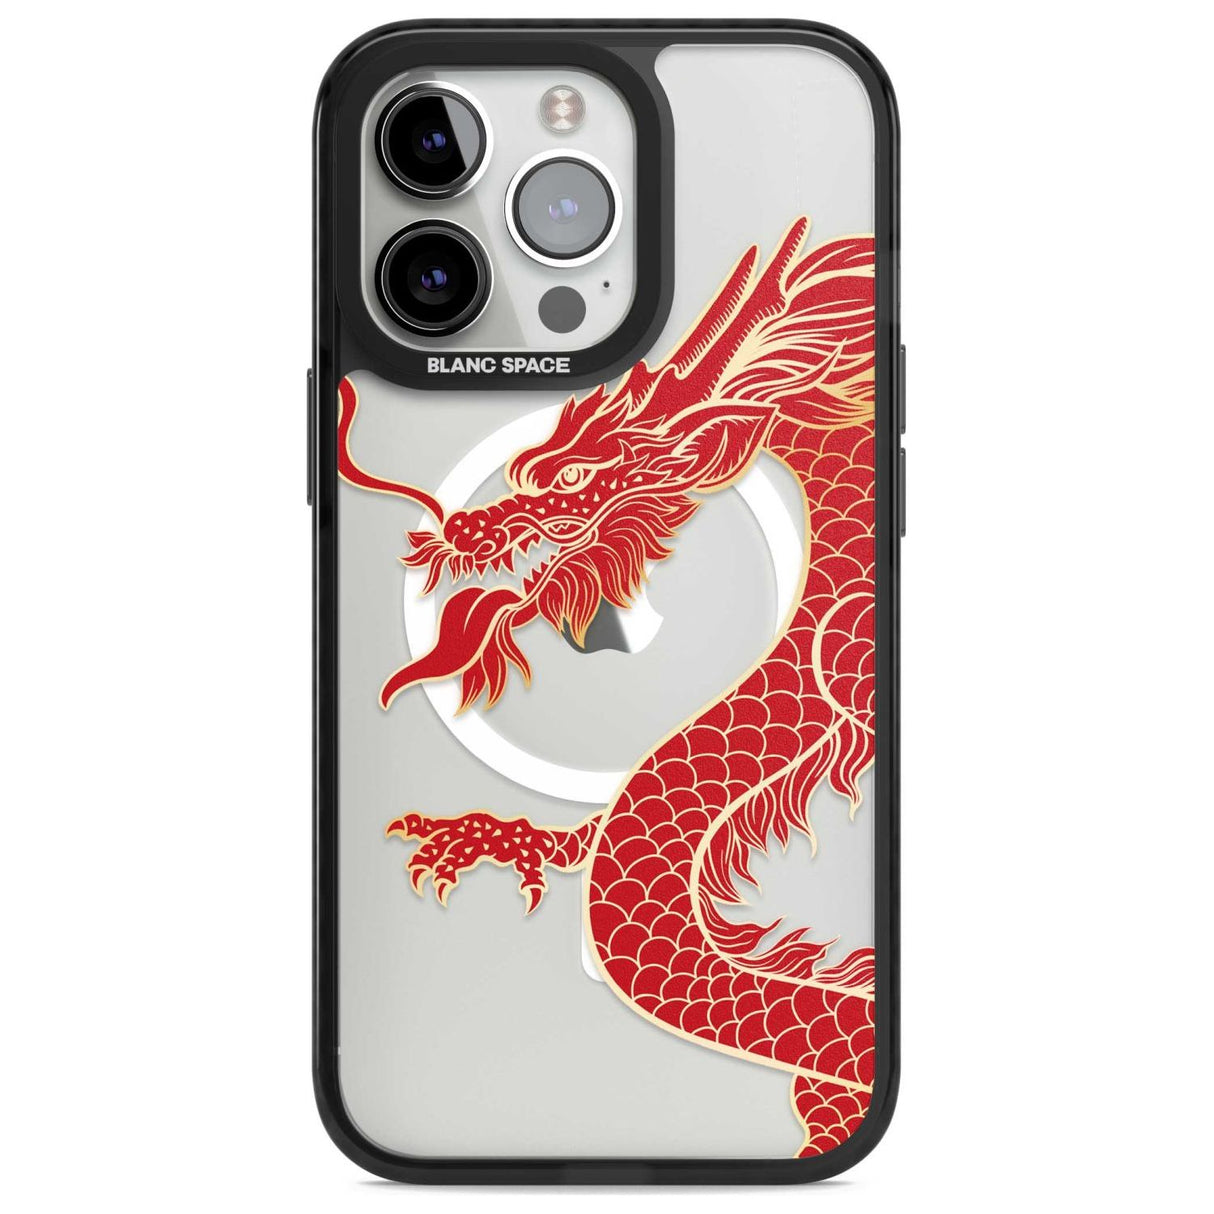 Large Red Dragon Phone Case iPhone 15 Pro Max / Magsafe Black Impact Case,iPhone 15 Pro / Magsafe Black Impact Case,iPhone 14 Pro Max / Magsafe Black Impact Case,iPhone 14 Pro / Magsafe Black Impact Case,iPhone 13 Pro / Magsafe Black Impact Case Blanc Space